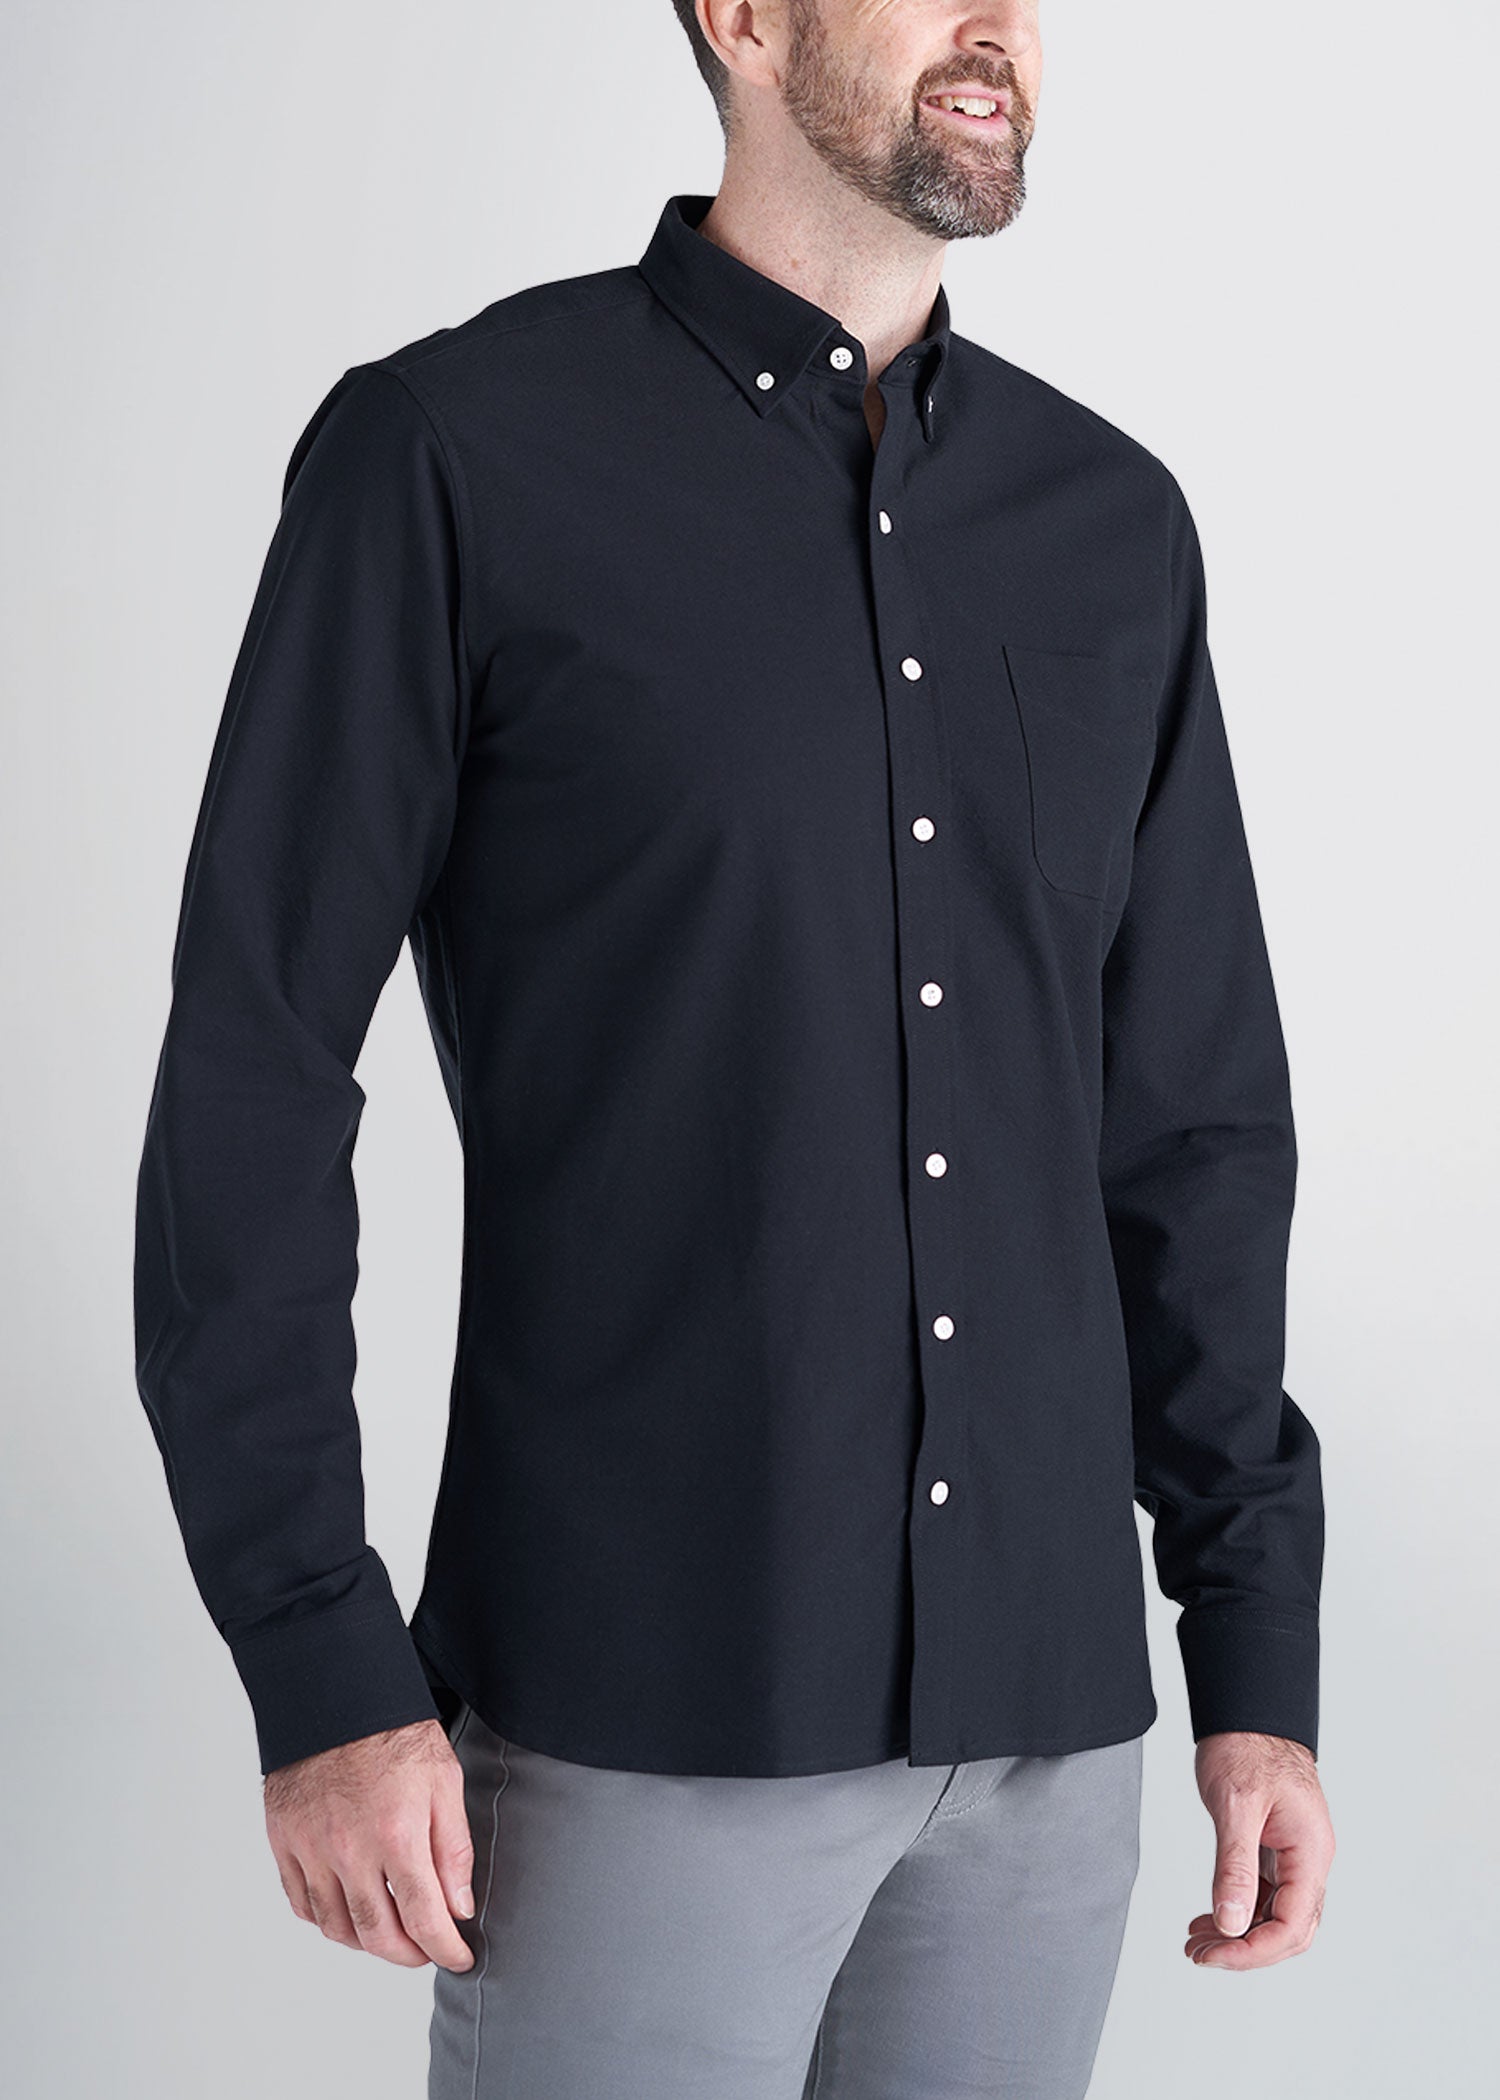 american-tall-mens-oxford-black-front